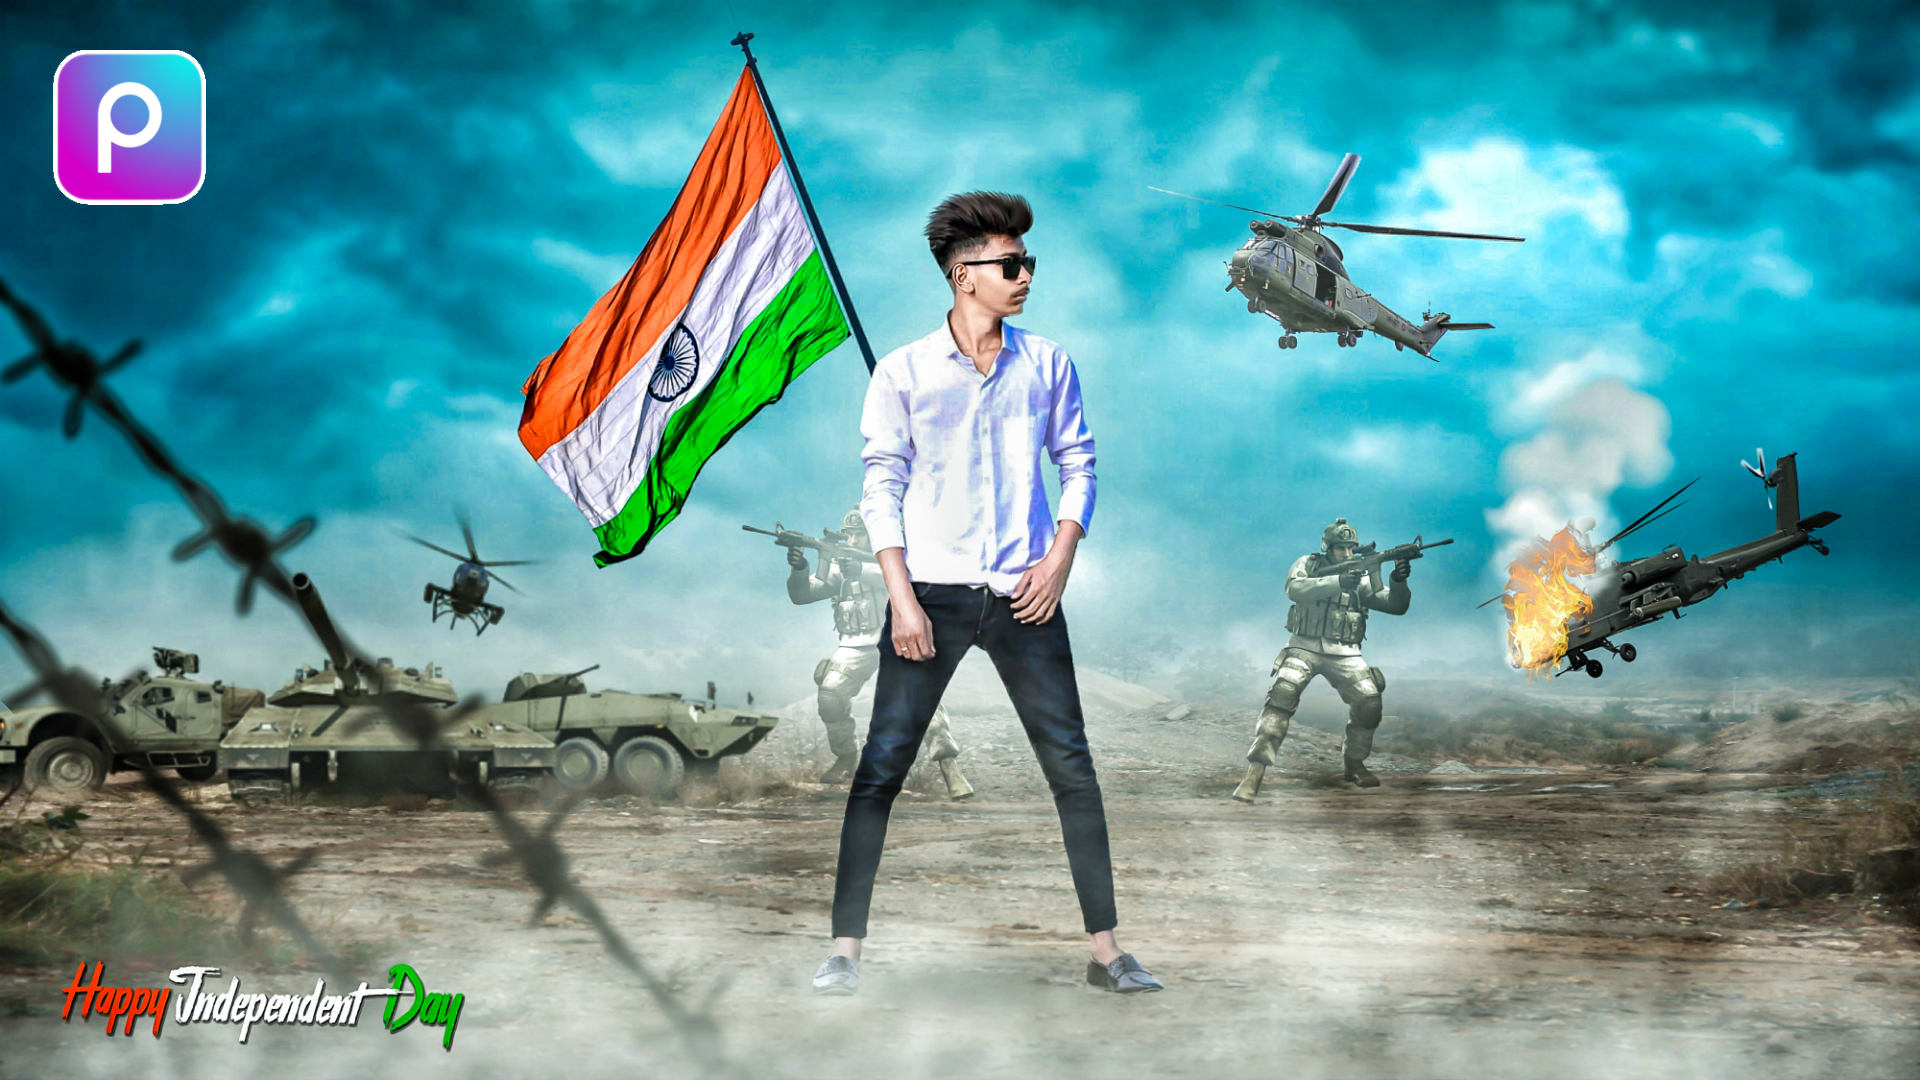 15 August independence day all background and png download - DJ PHOTO  EDITING